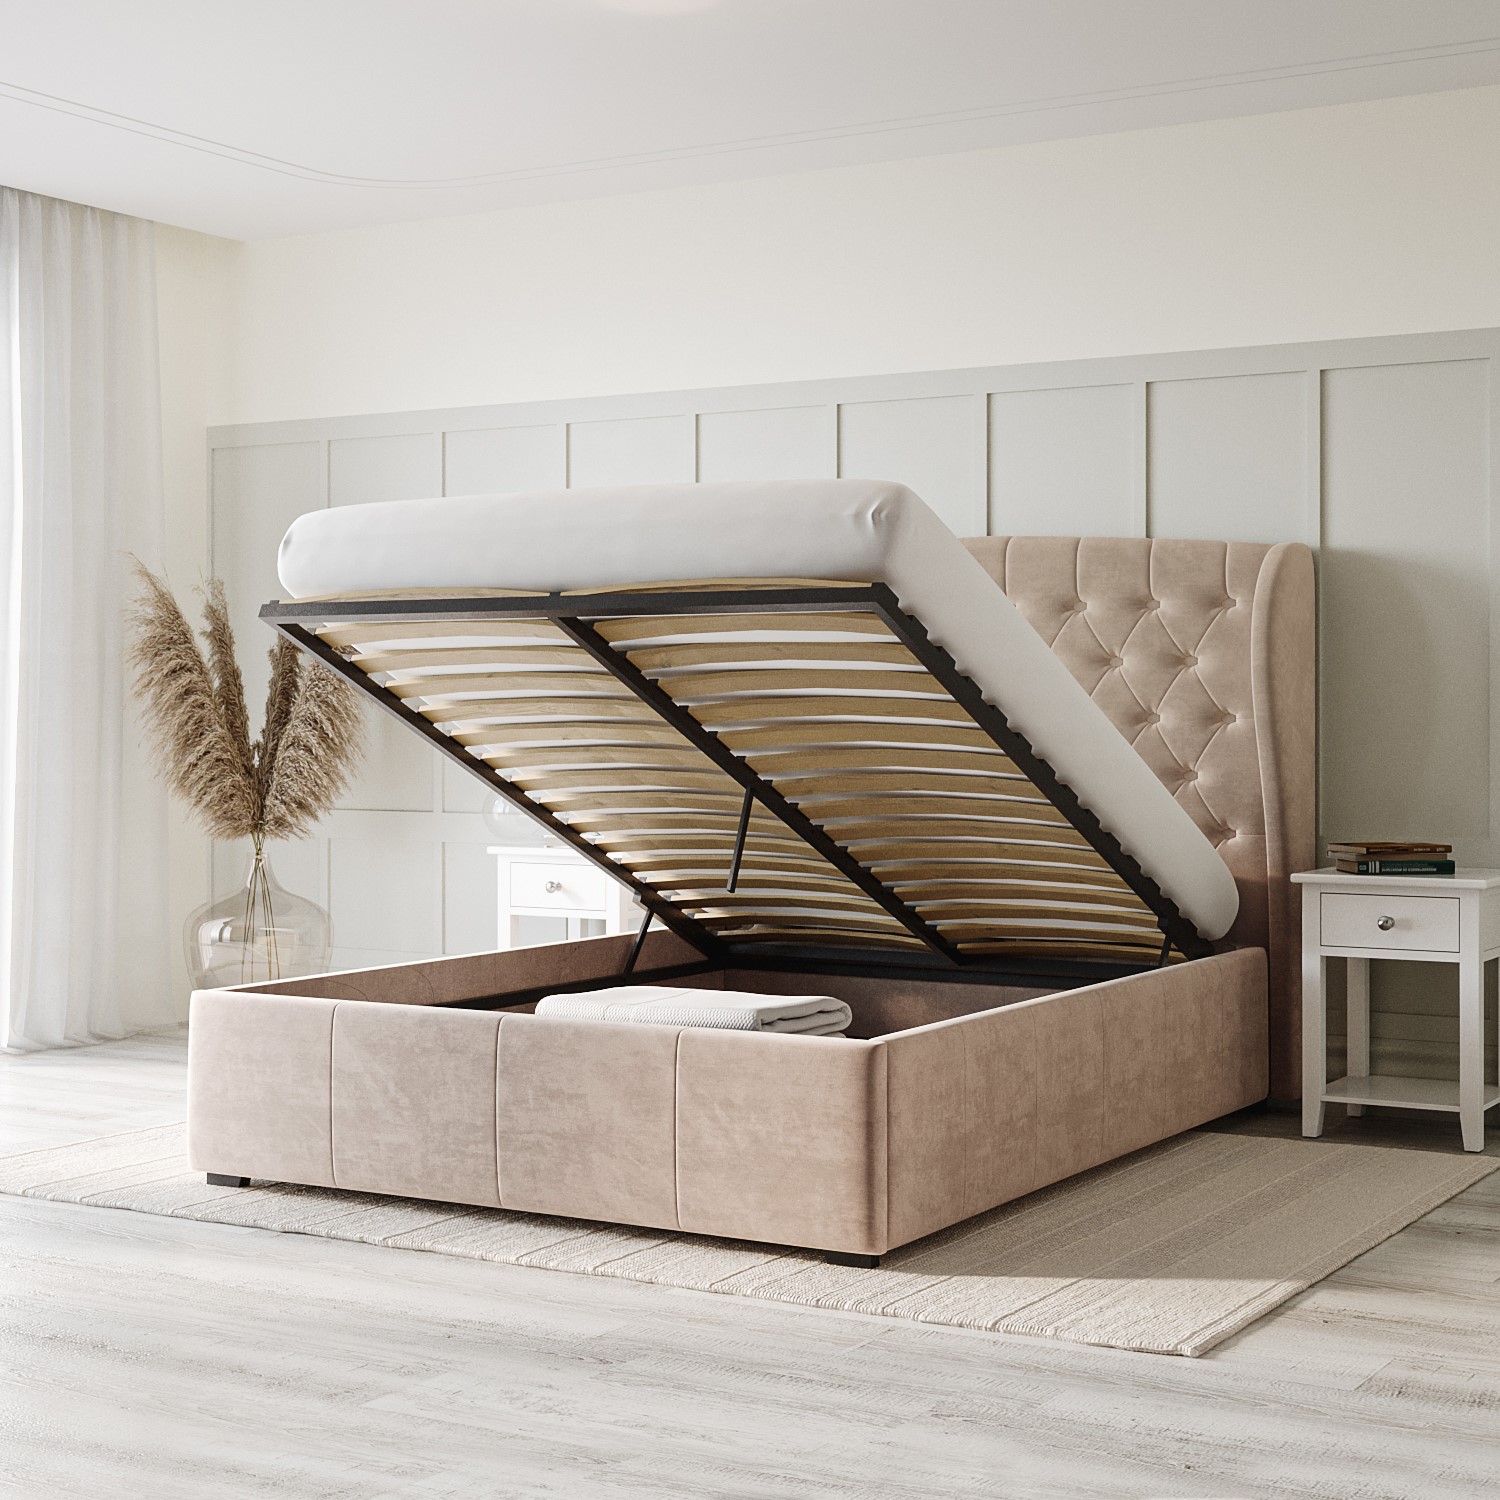 Read more about Beige velvet king size ottoman bed with winged headboard safina